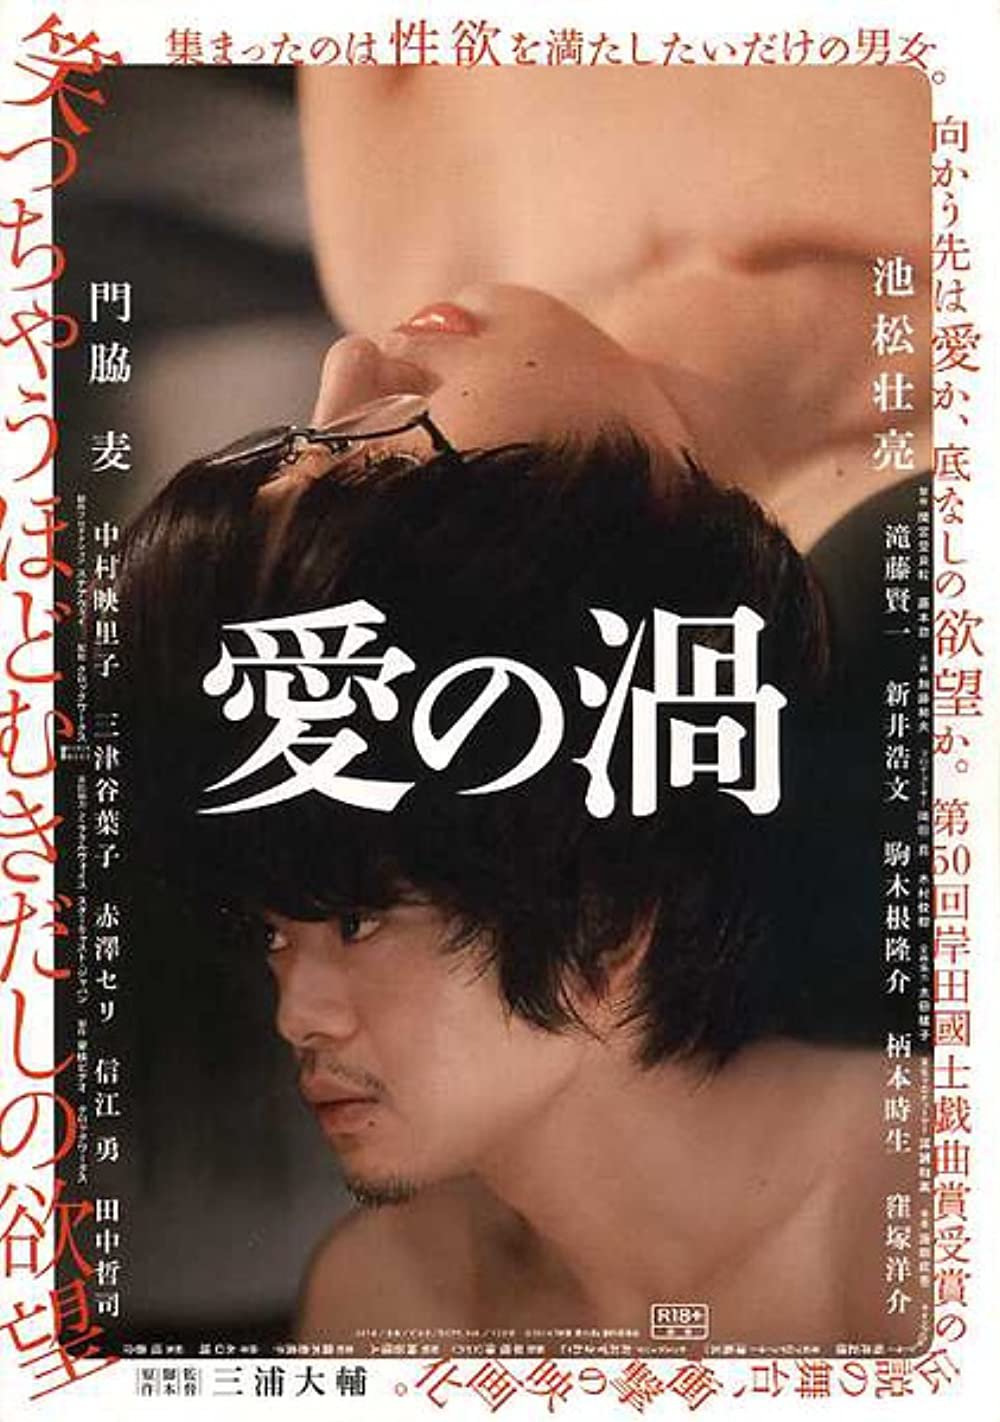 Top 10 japanese adult movies